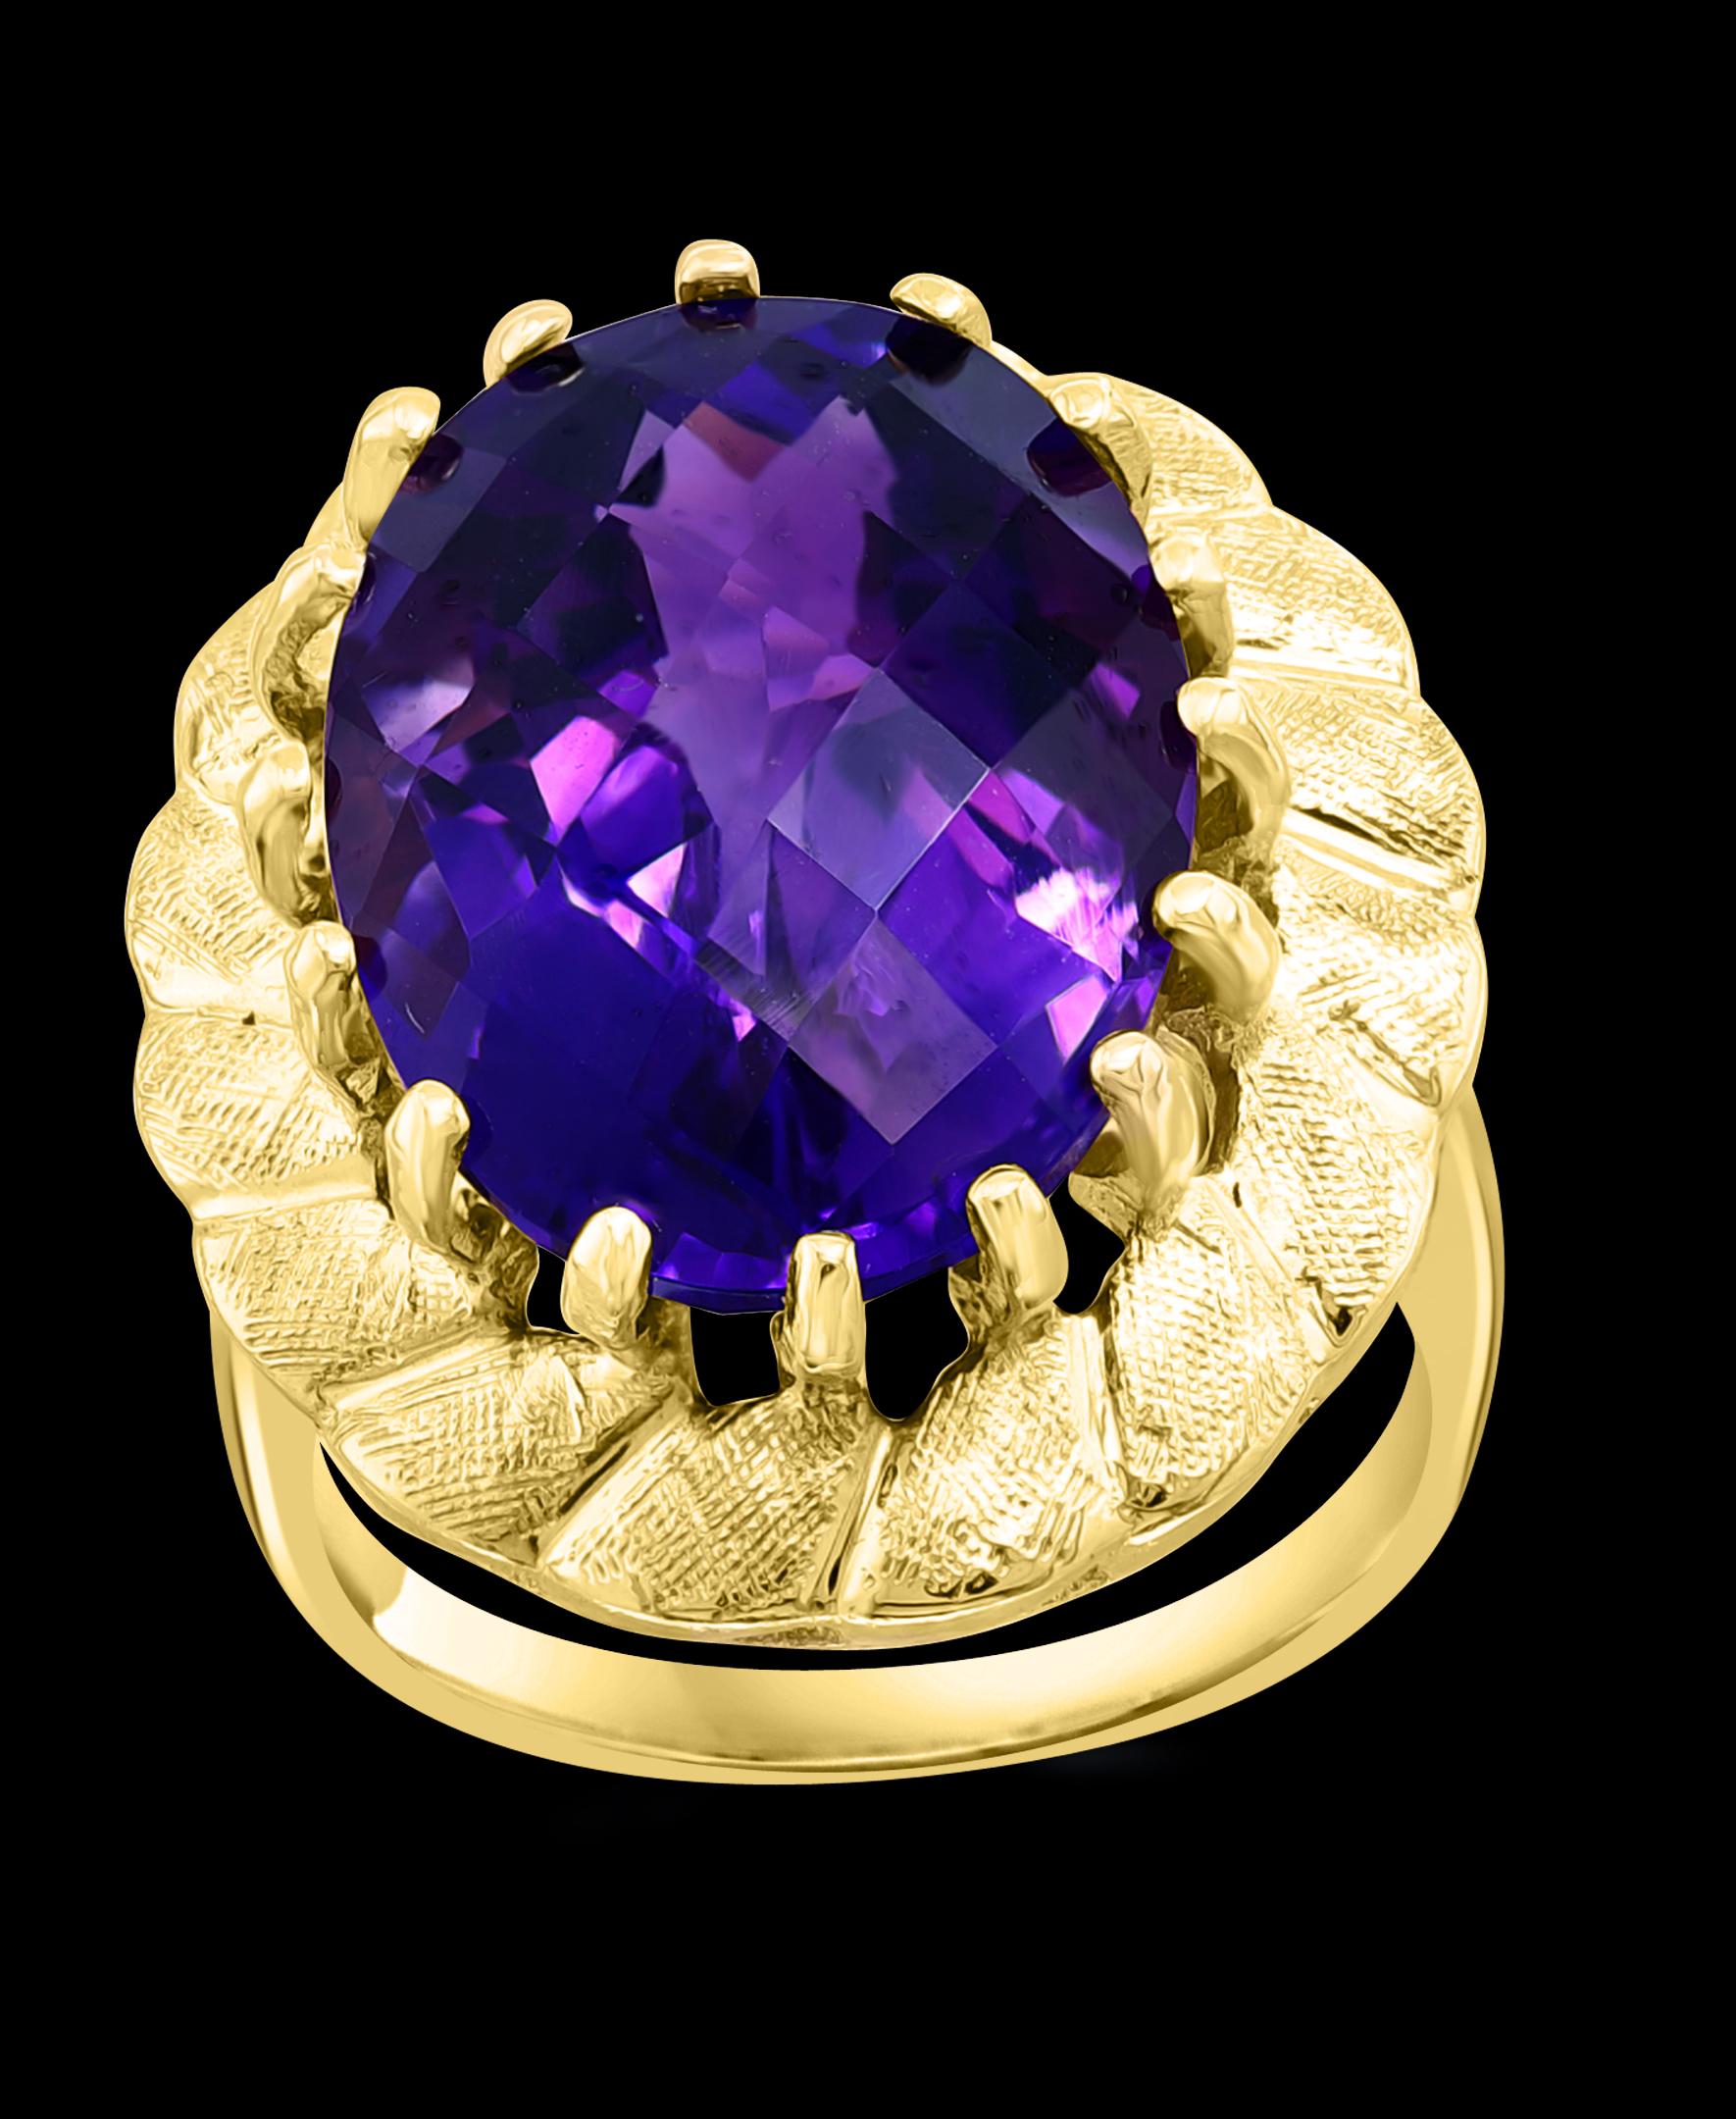 Approximately 10 Carat Checker board Amethyst Cocktail Ring in 14 Karat Yellow Gold Size 6.5
This is a Beautiful Cocktail ring ring which has a large approximately 10  carat of high quality Amethyst . Color and clarity is extremely nice. Large Oval